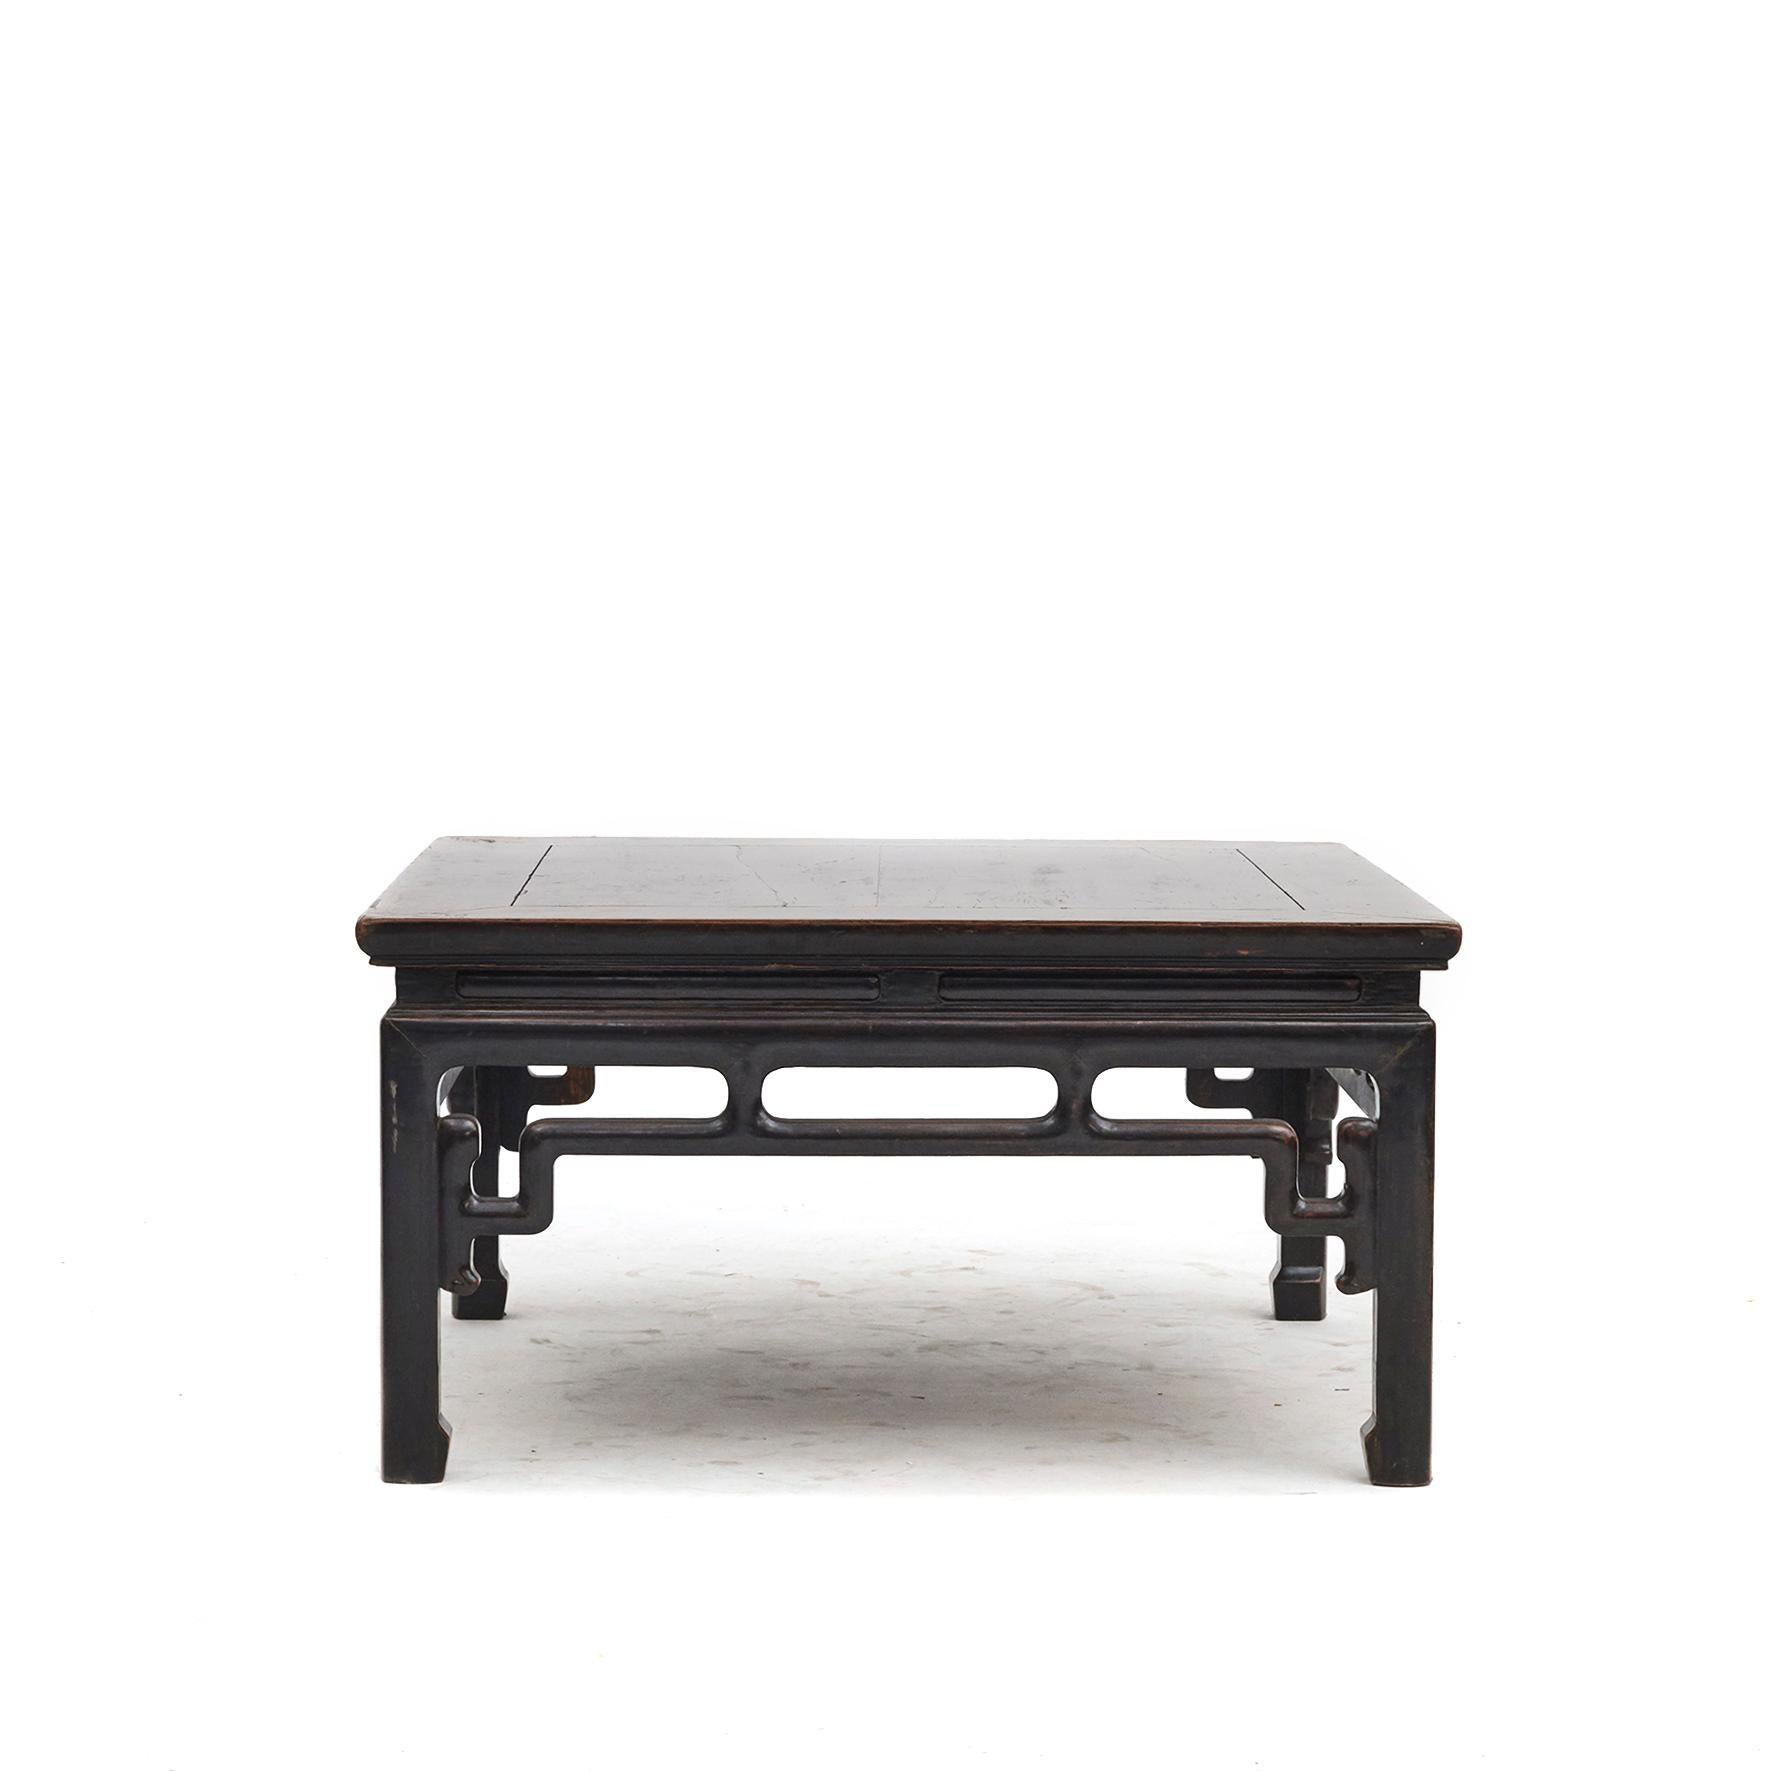 Chinese Qing Dynasty Coffee Table For Sale